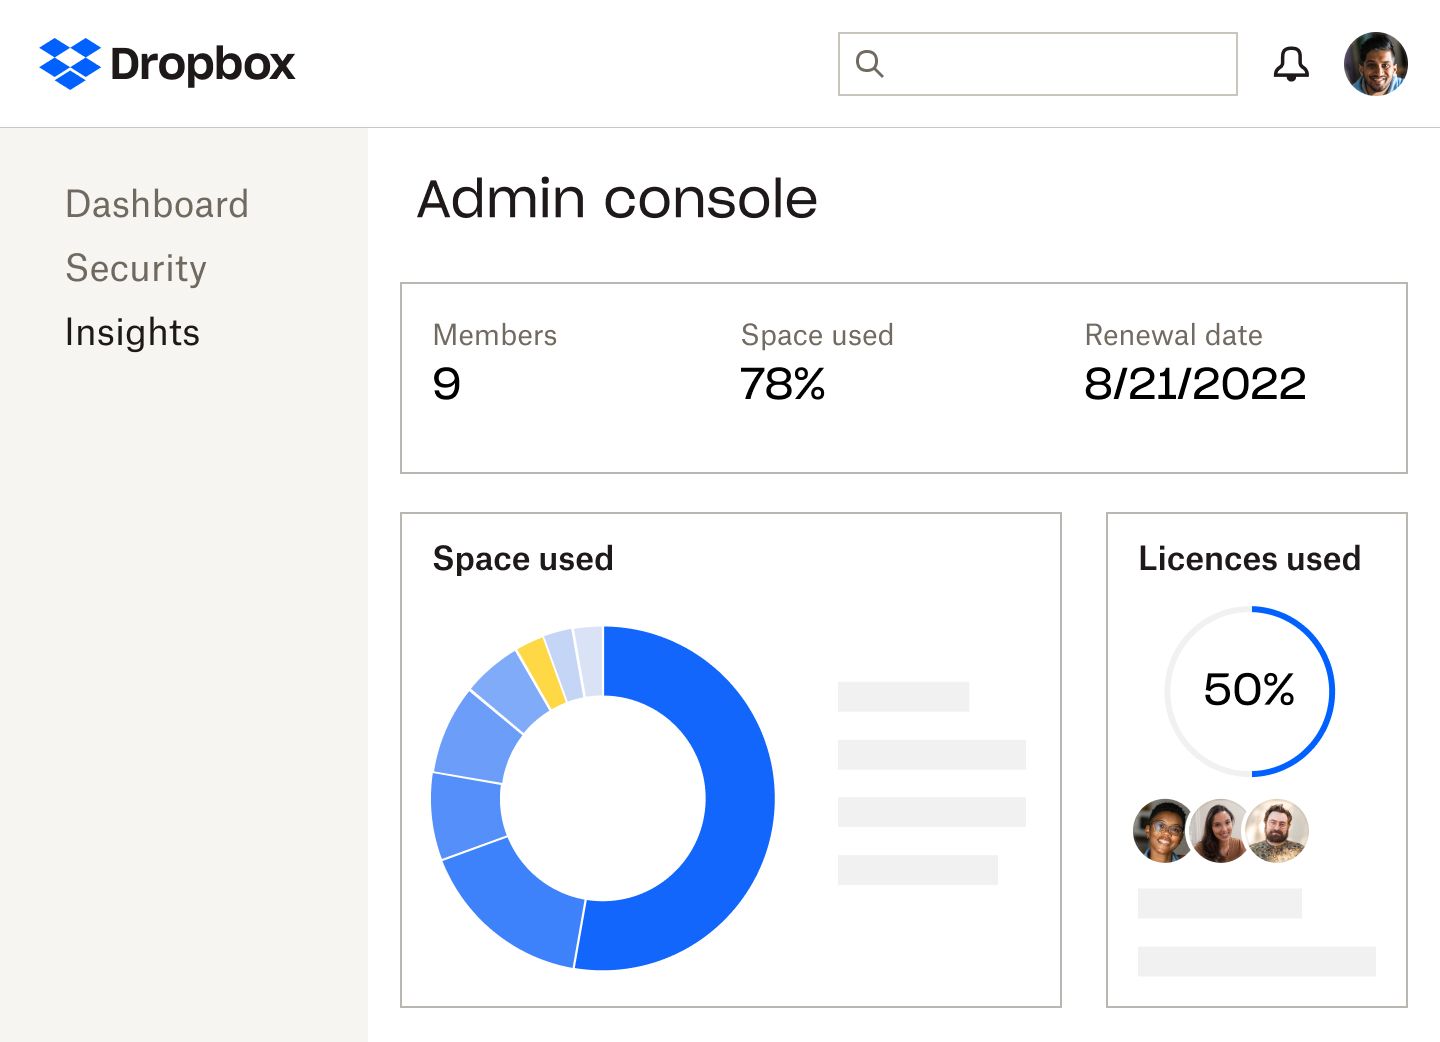 The Drobox admin console showing the number of members of team, the percent of space used, and the renewal date